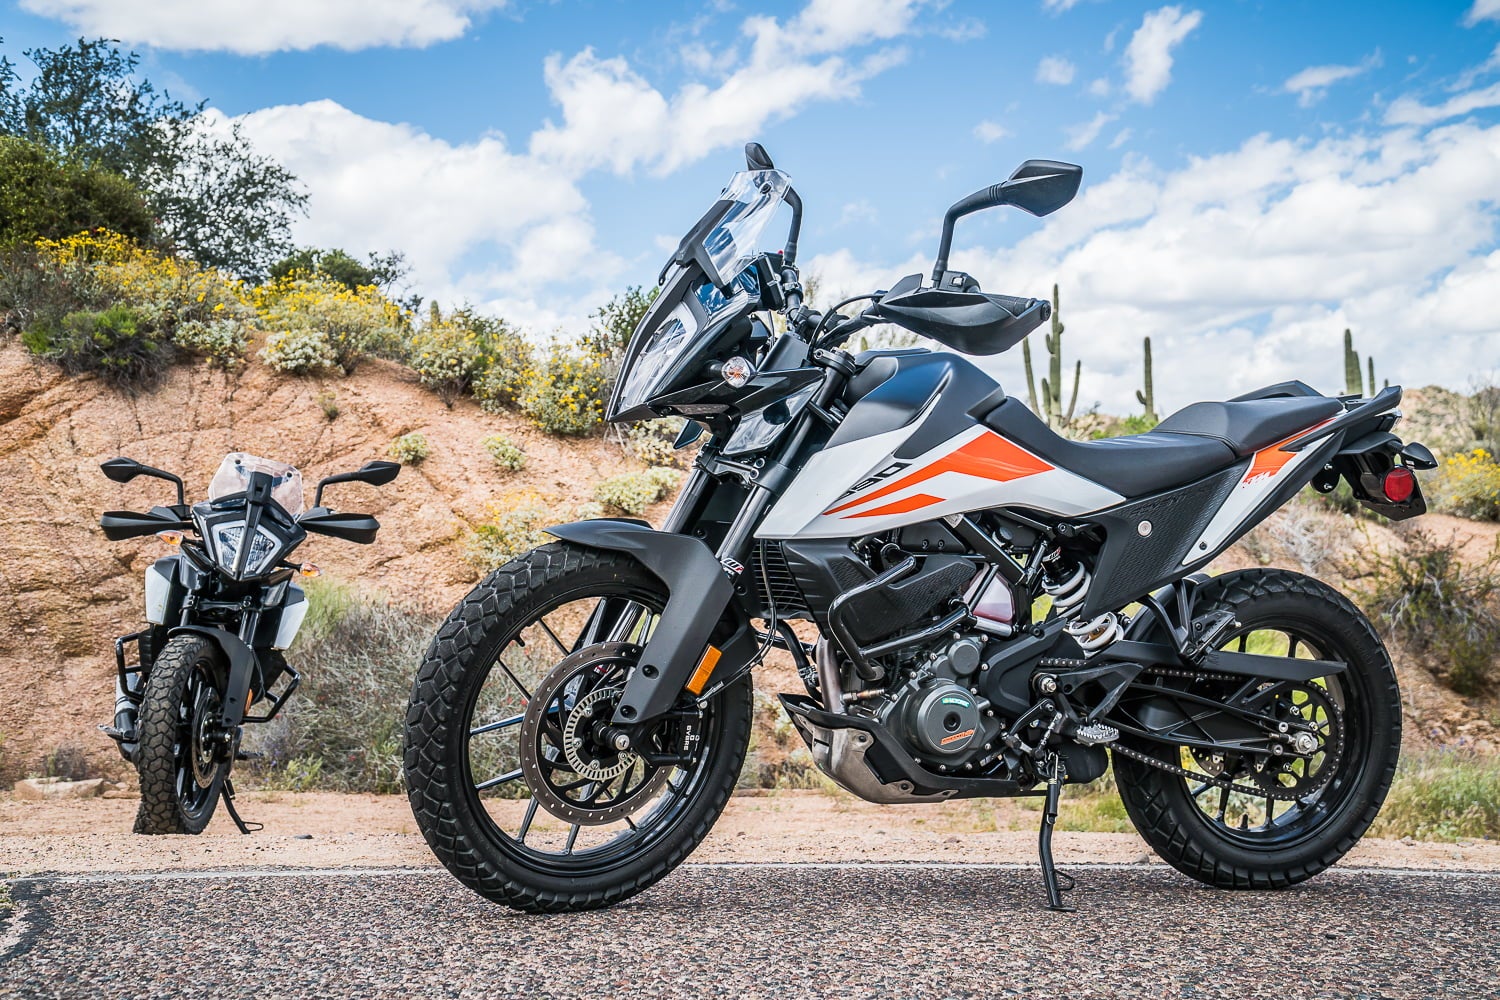 2020 KTM 390 Adventure review | TopGear India